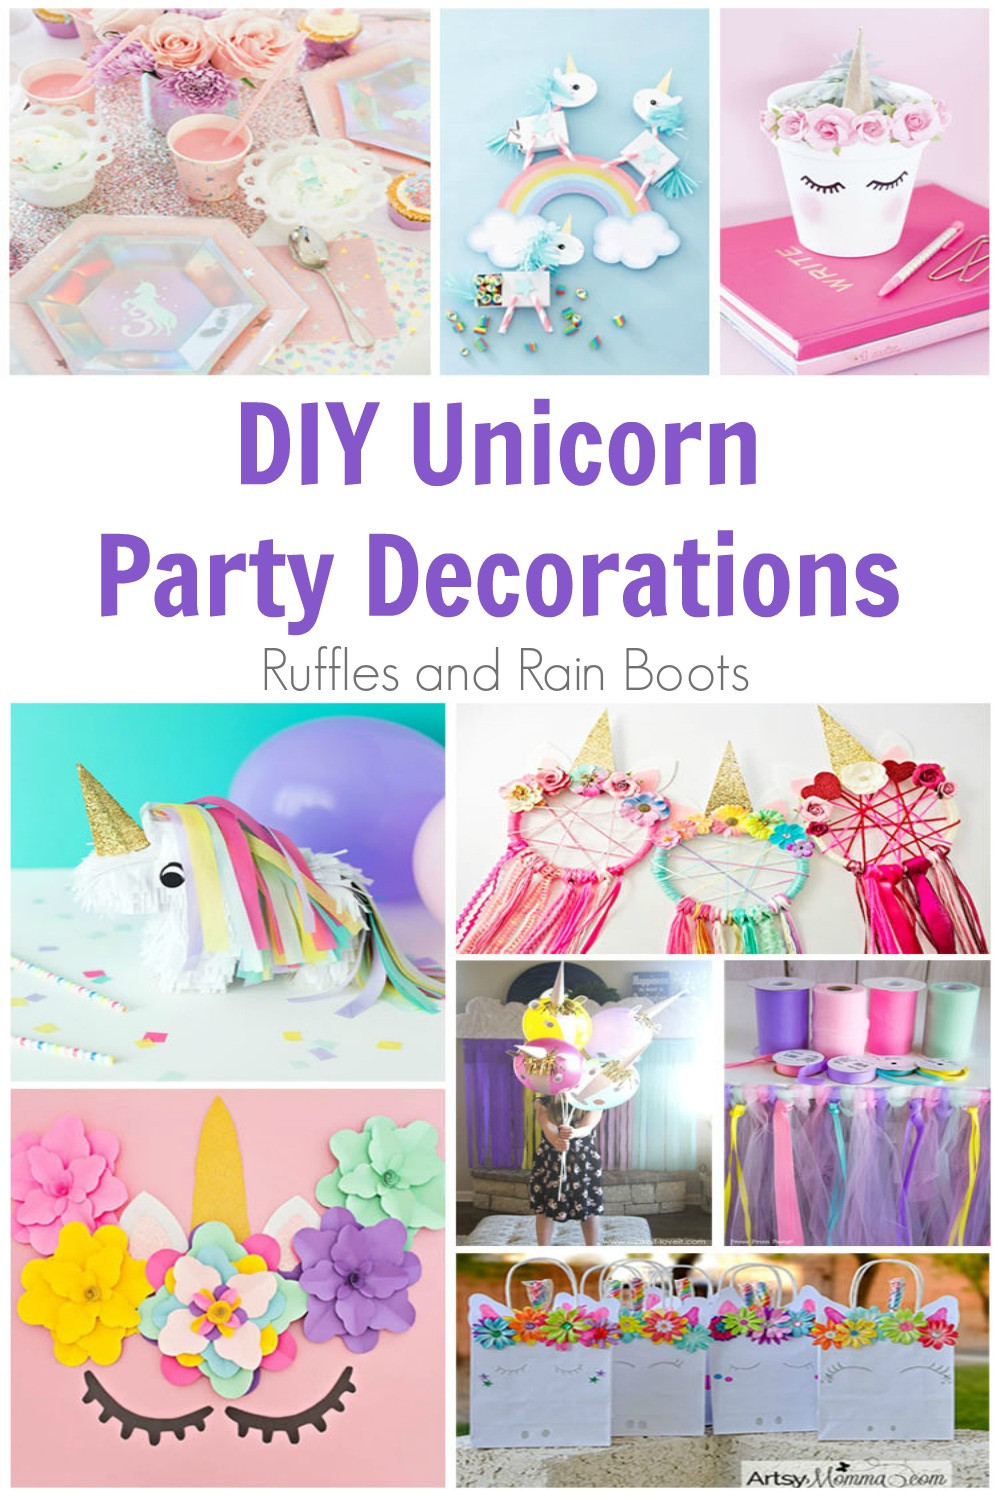 Unicorn Party Ideas Diy
 DIY Unicorn Party Decorations You Can Make Yourself